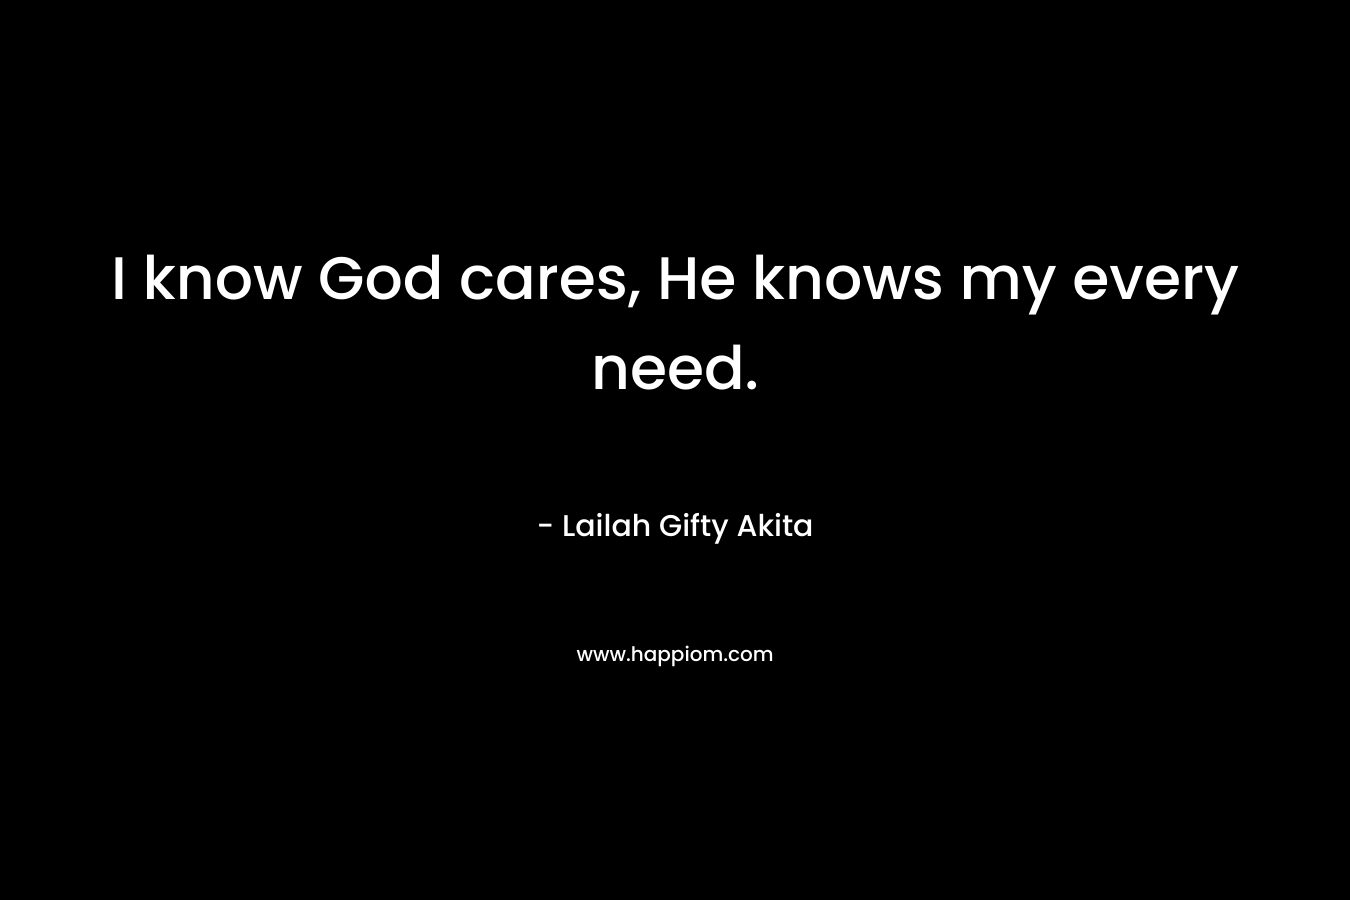 I know God cares, He knows my every need.